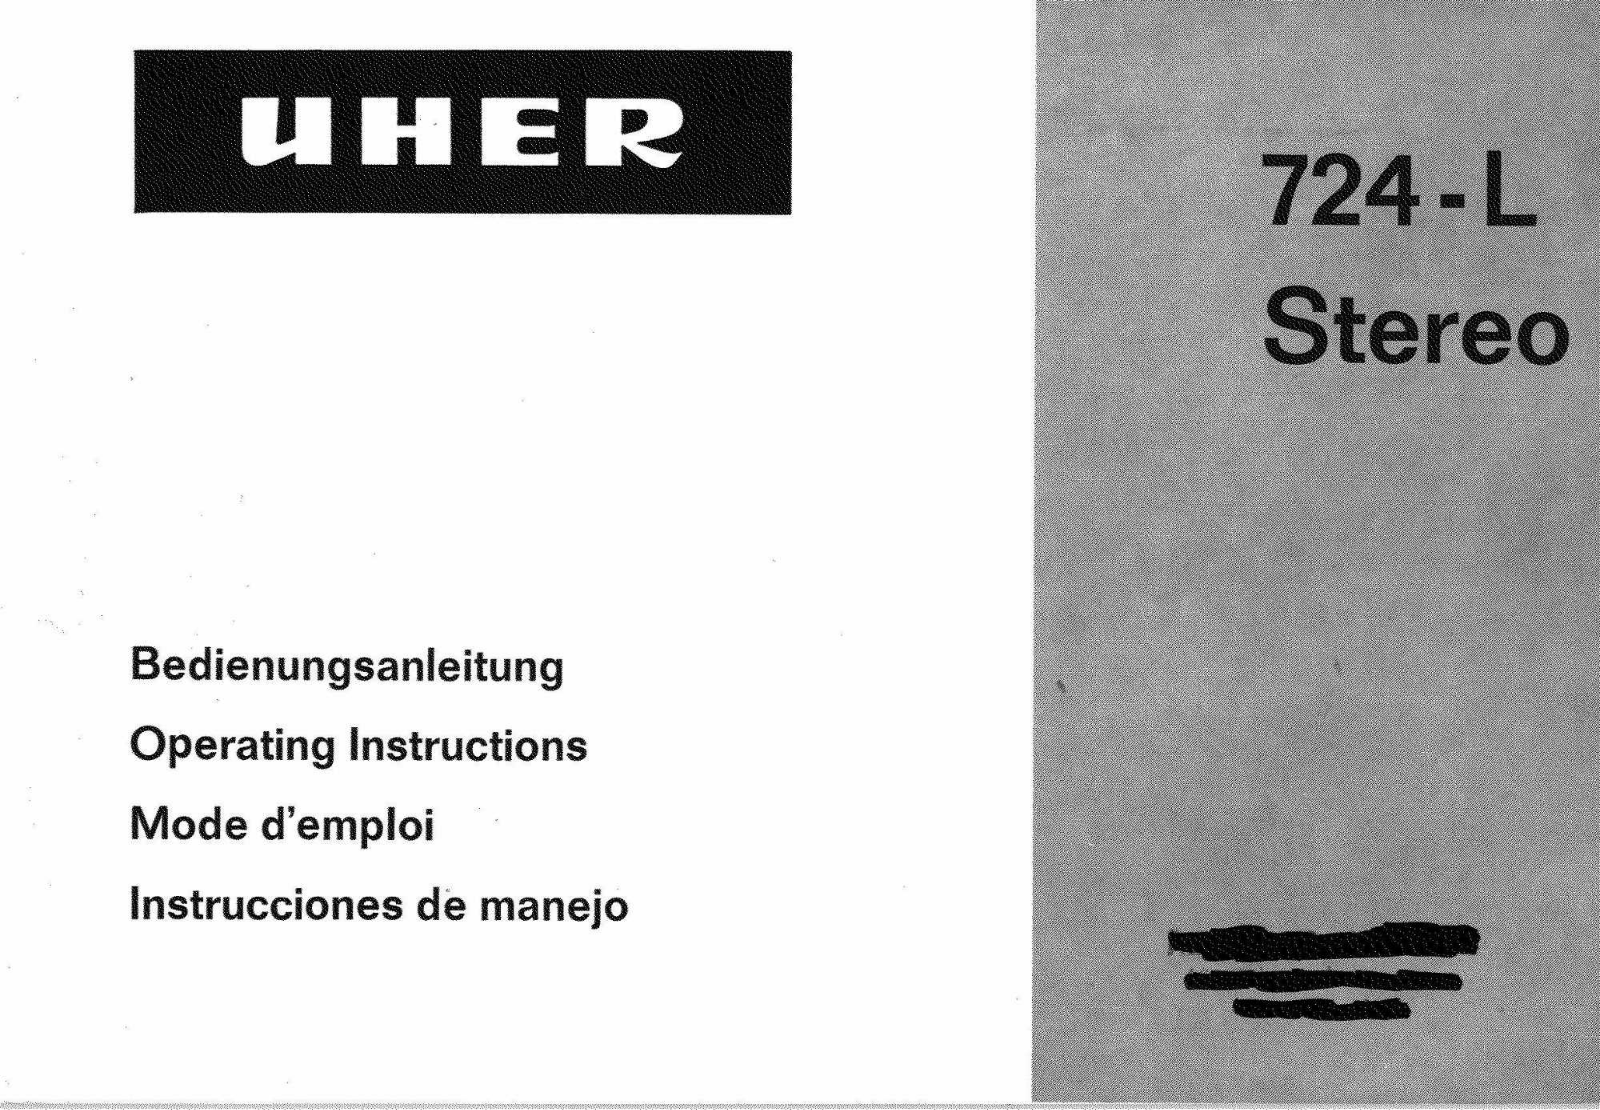 Uher 724-L Stereo Owners manual